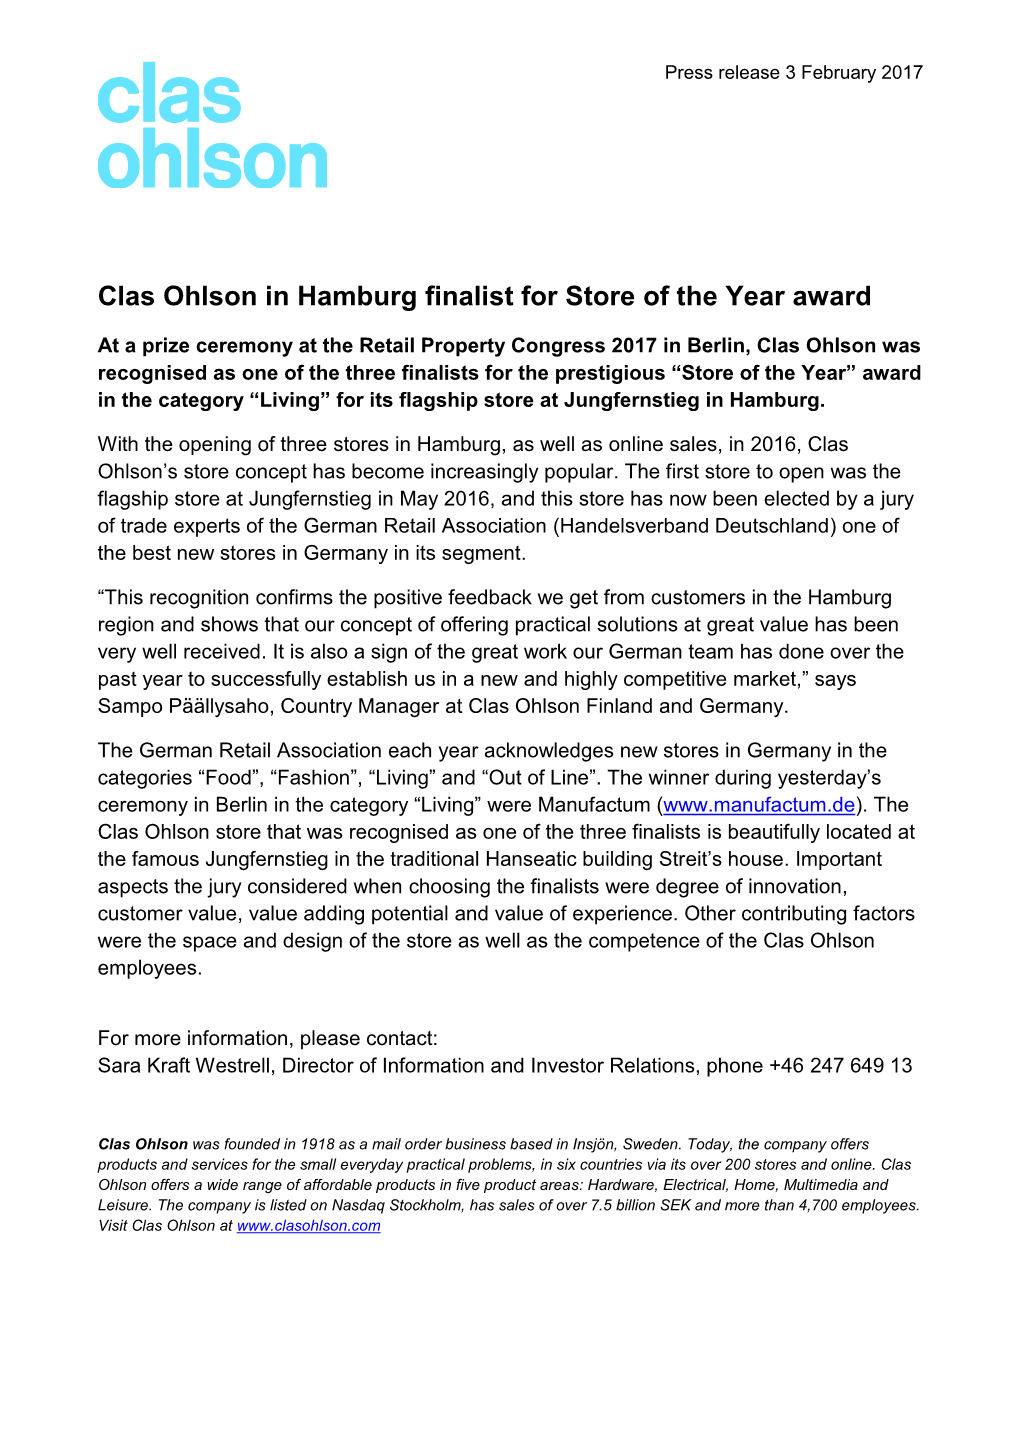 Clas Ohlson in Hamburg Finalist for Store of the Year Award